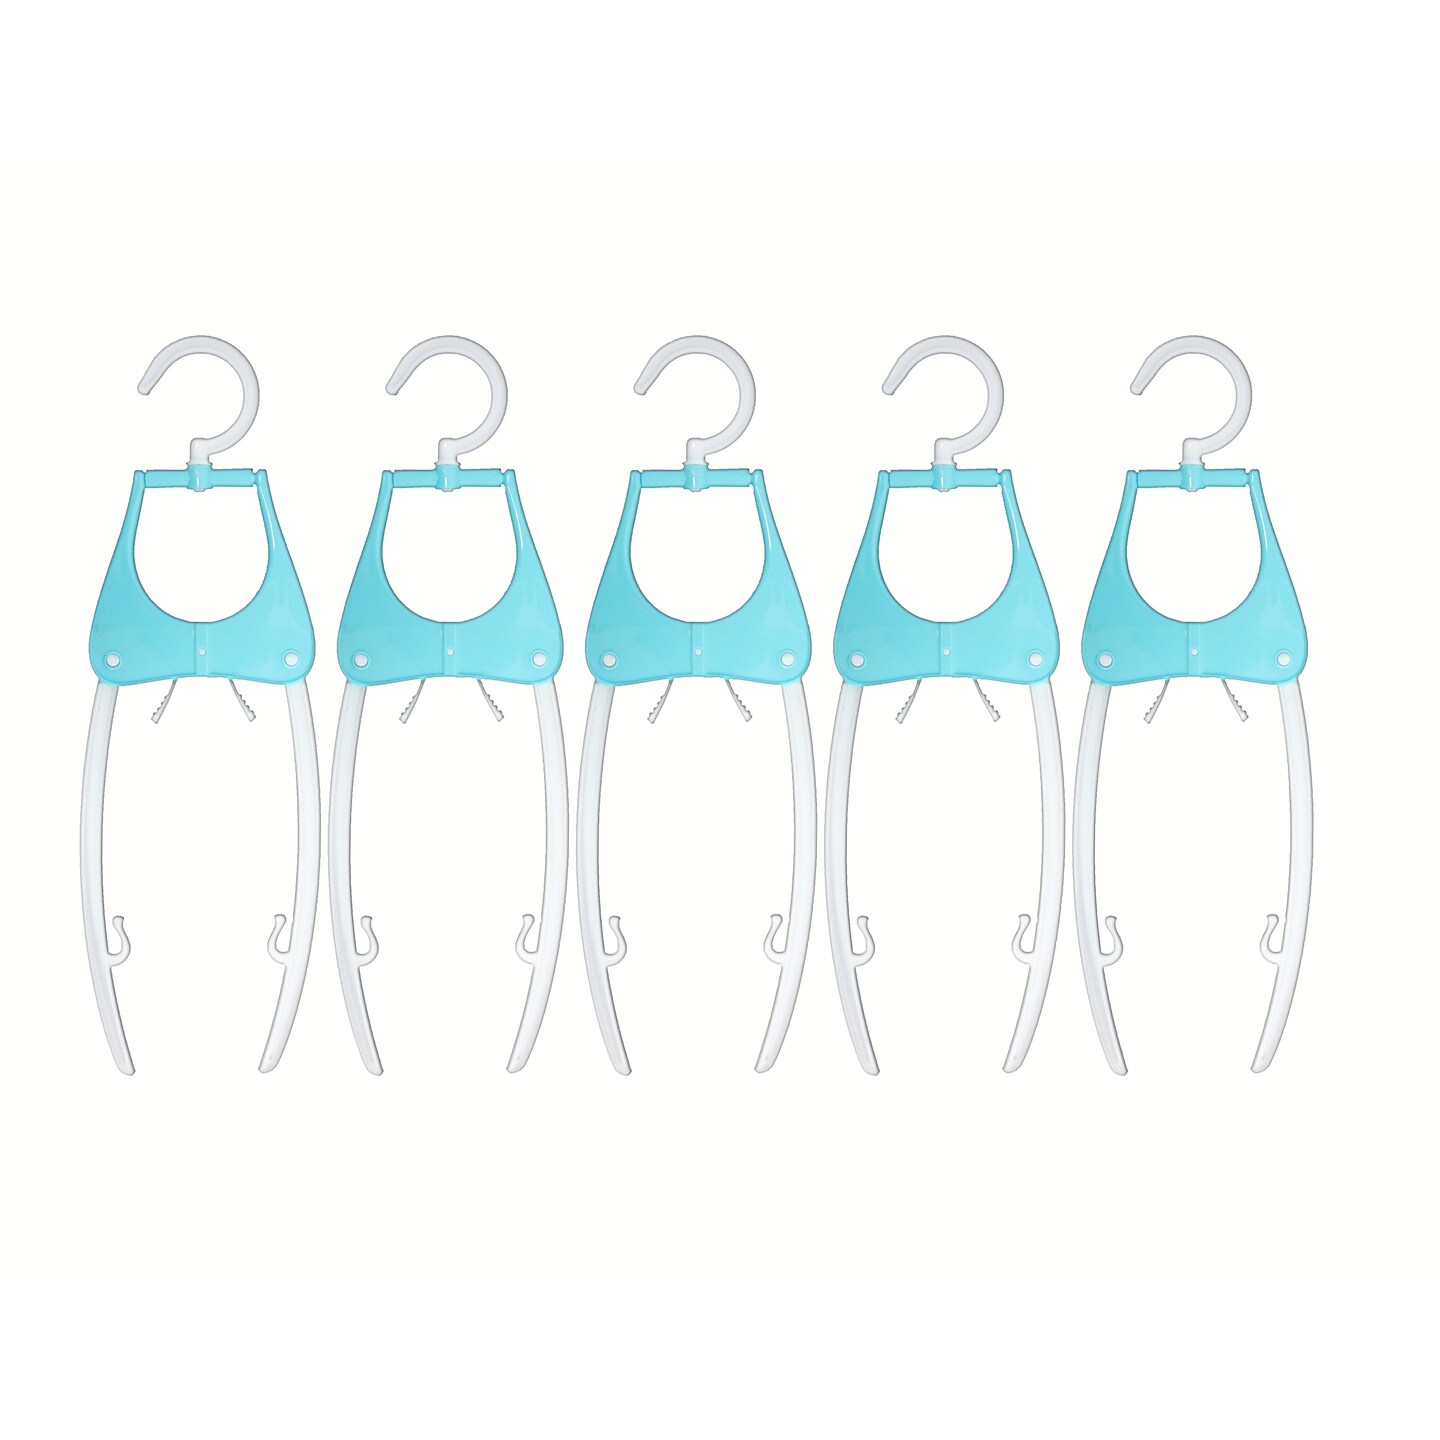 Basicwise Pack of 5 Foldable Portable Plastic Hangers for Travel